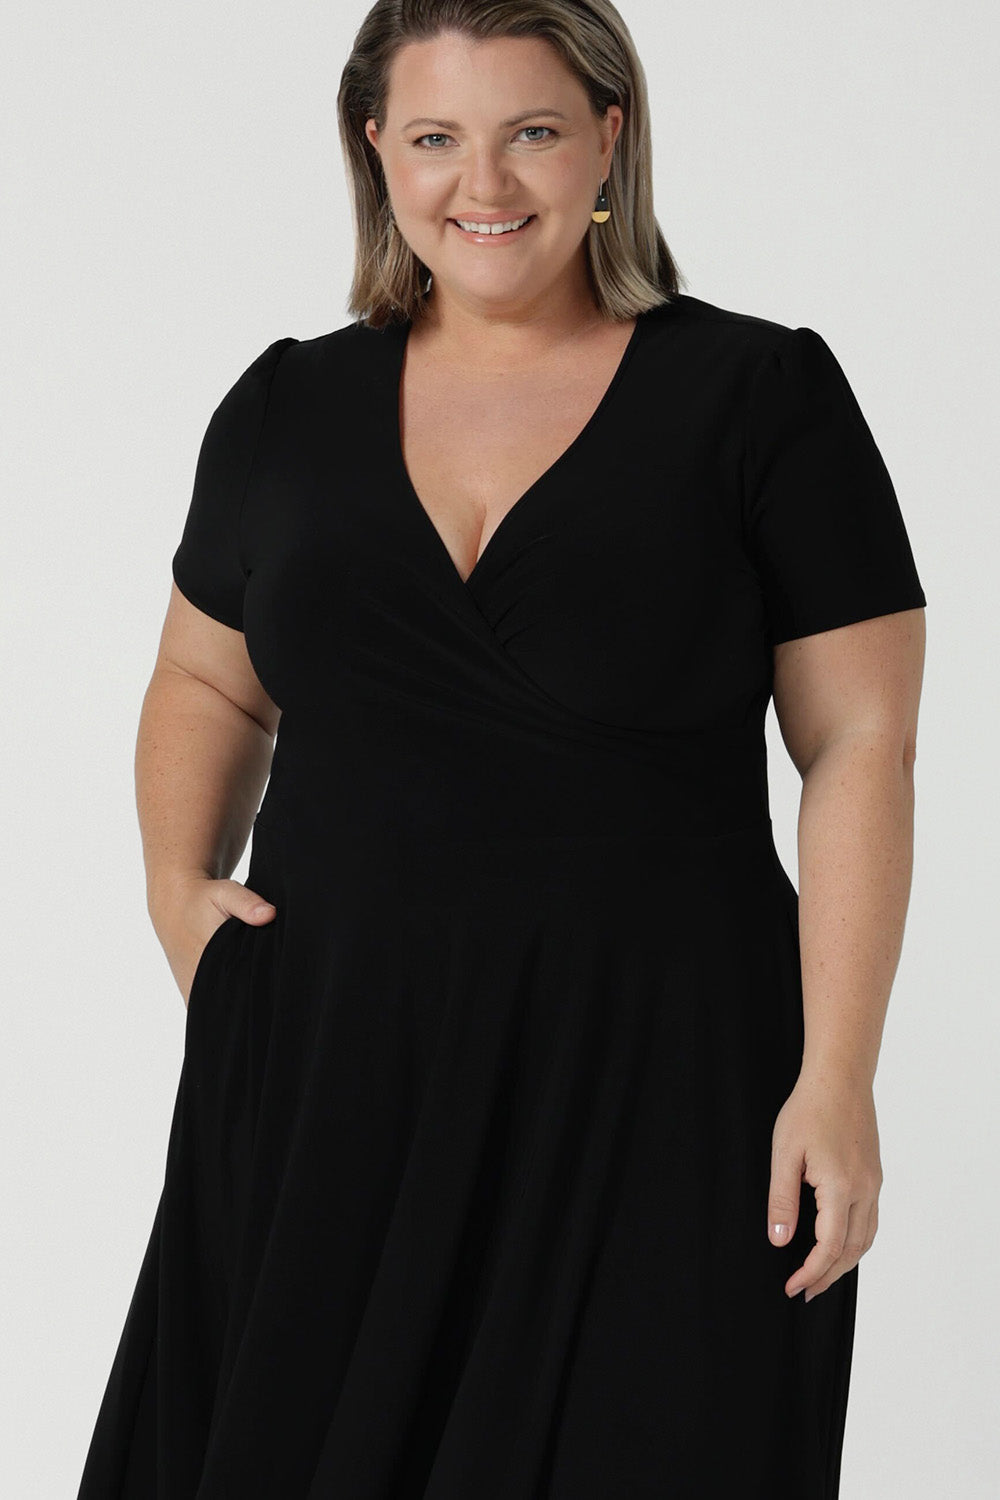 Close up of a size inclusive fashion for women.Curvy size 16 model wears black jersey dress in a fixed wrap style midi length. Comfortable corporate dress from work to weekend. Made in Australia for women size 8 - 24.